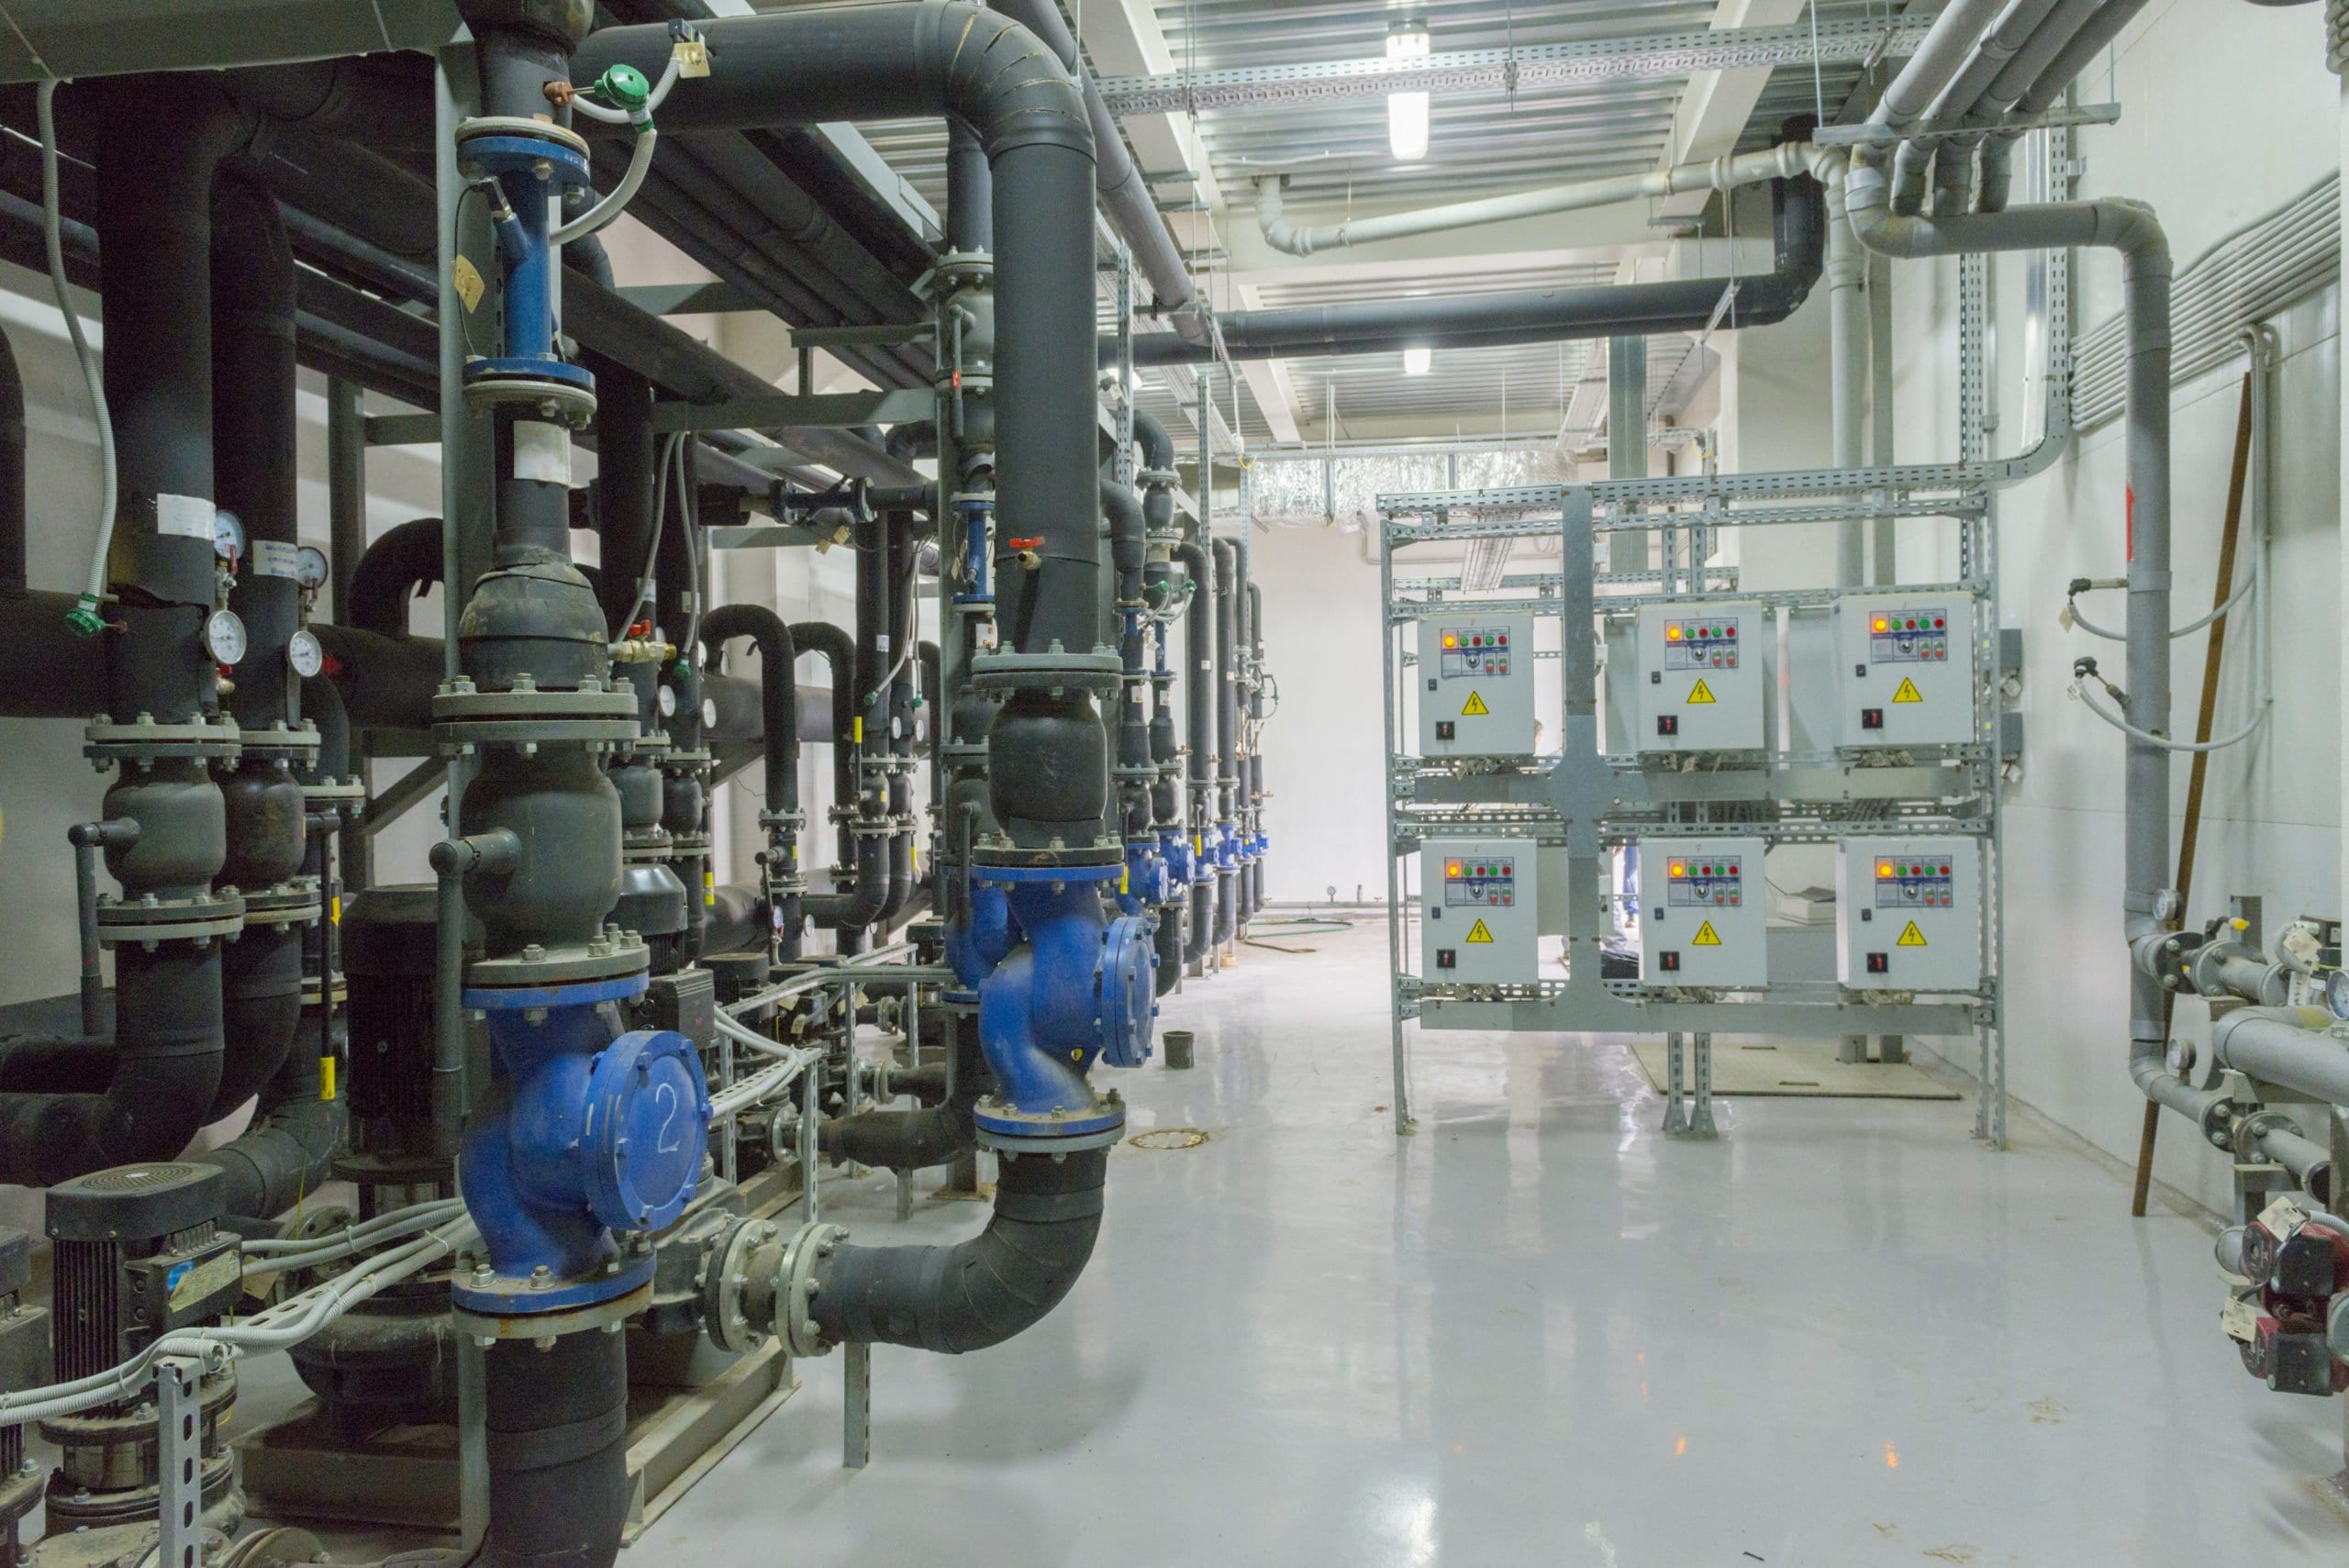 Pipes in a wastewater or storm water plant that can have Dorsett Control's controls and SCADA to help assist in better management of the system.